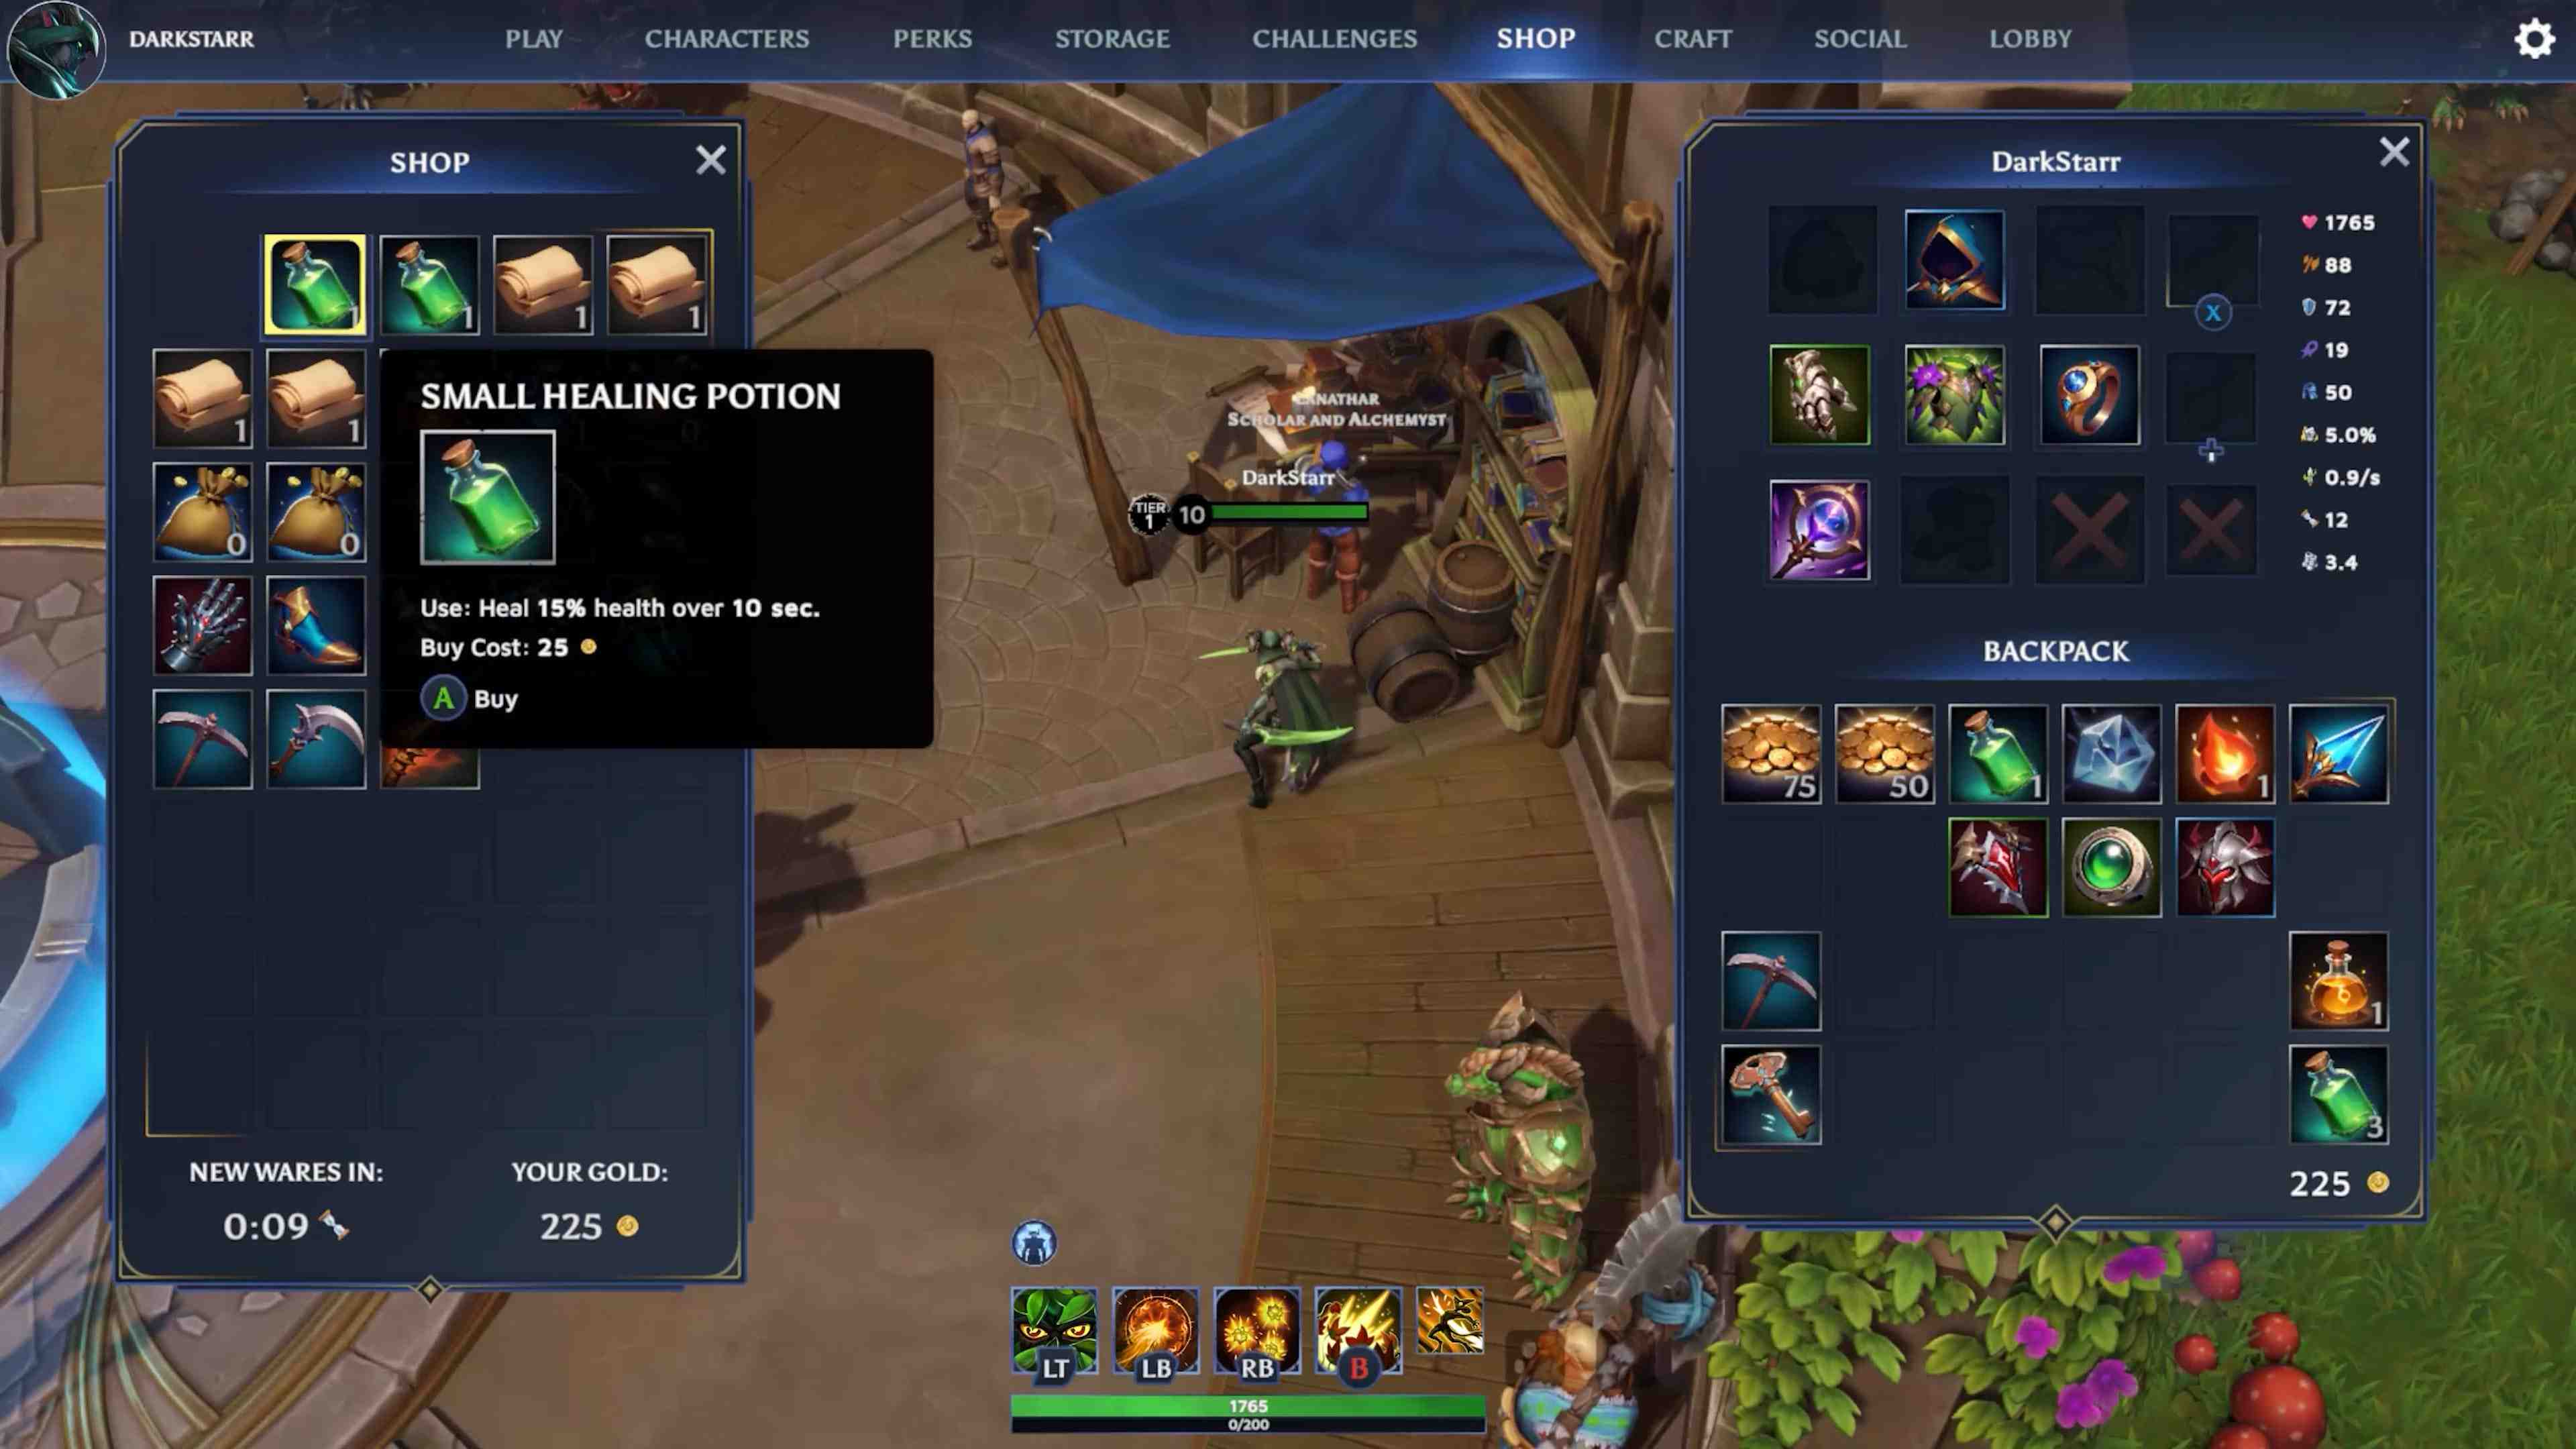 In game screenshot of the shop.